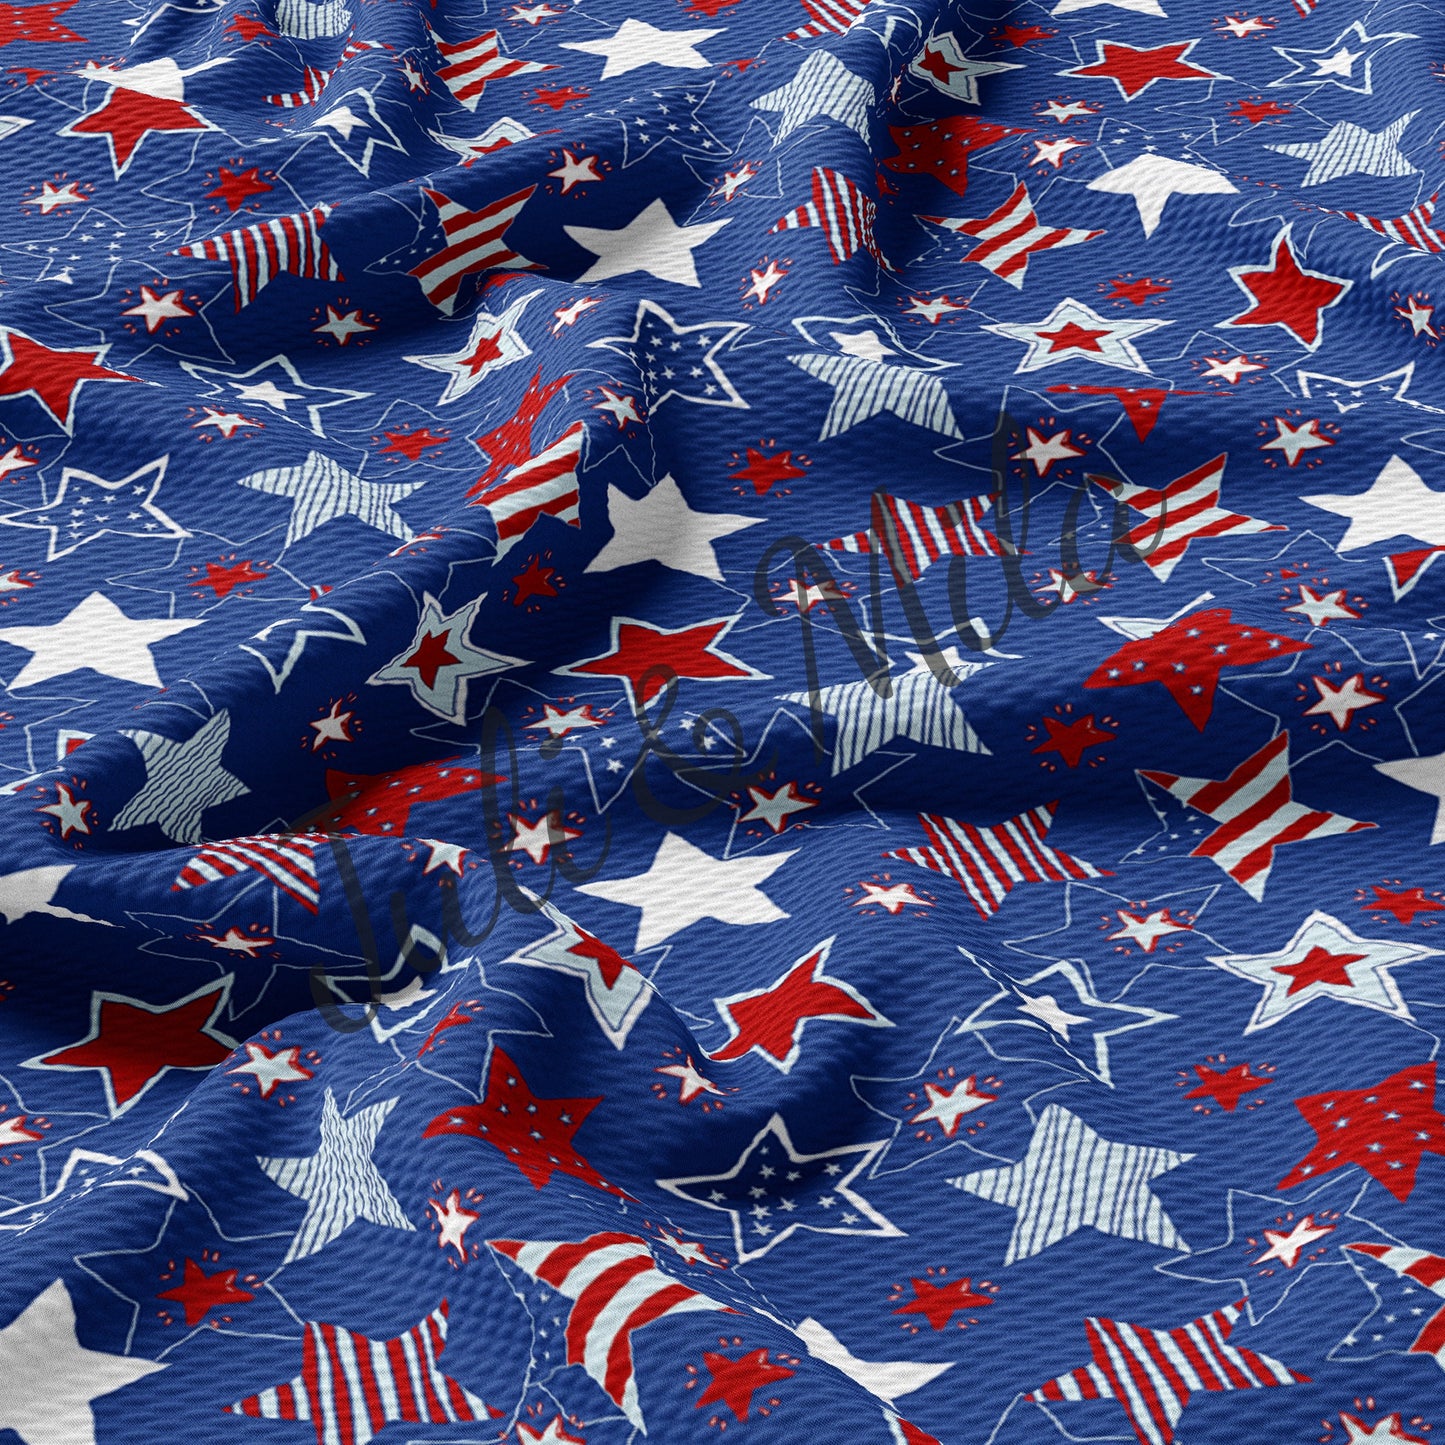 Patriotic 4th of July Printed Bullet Fabric USA Flag PT15